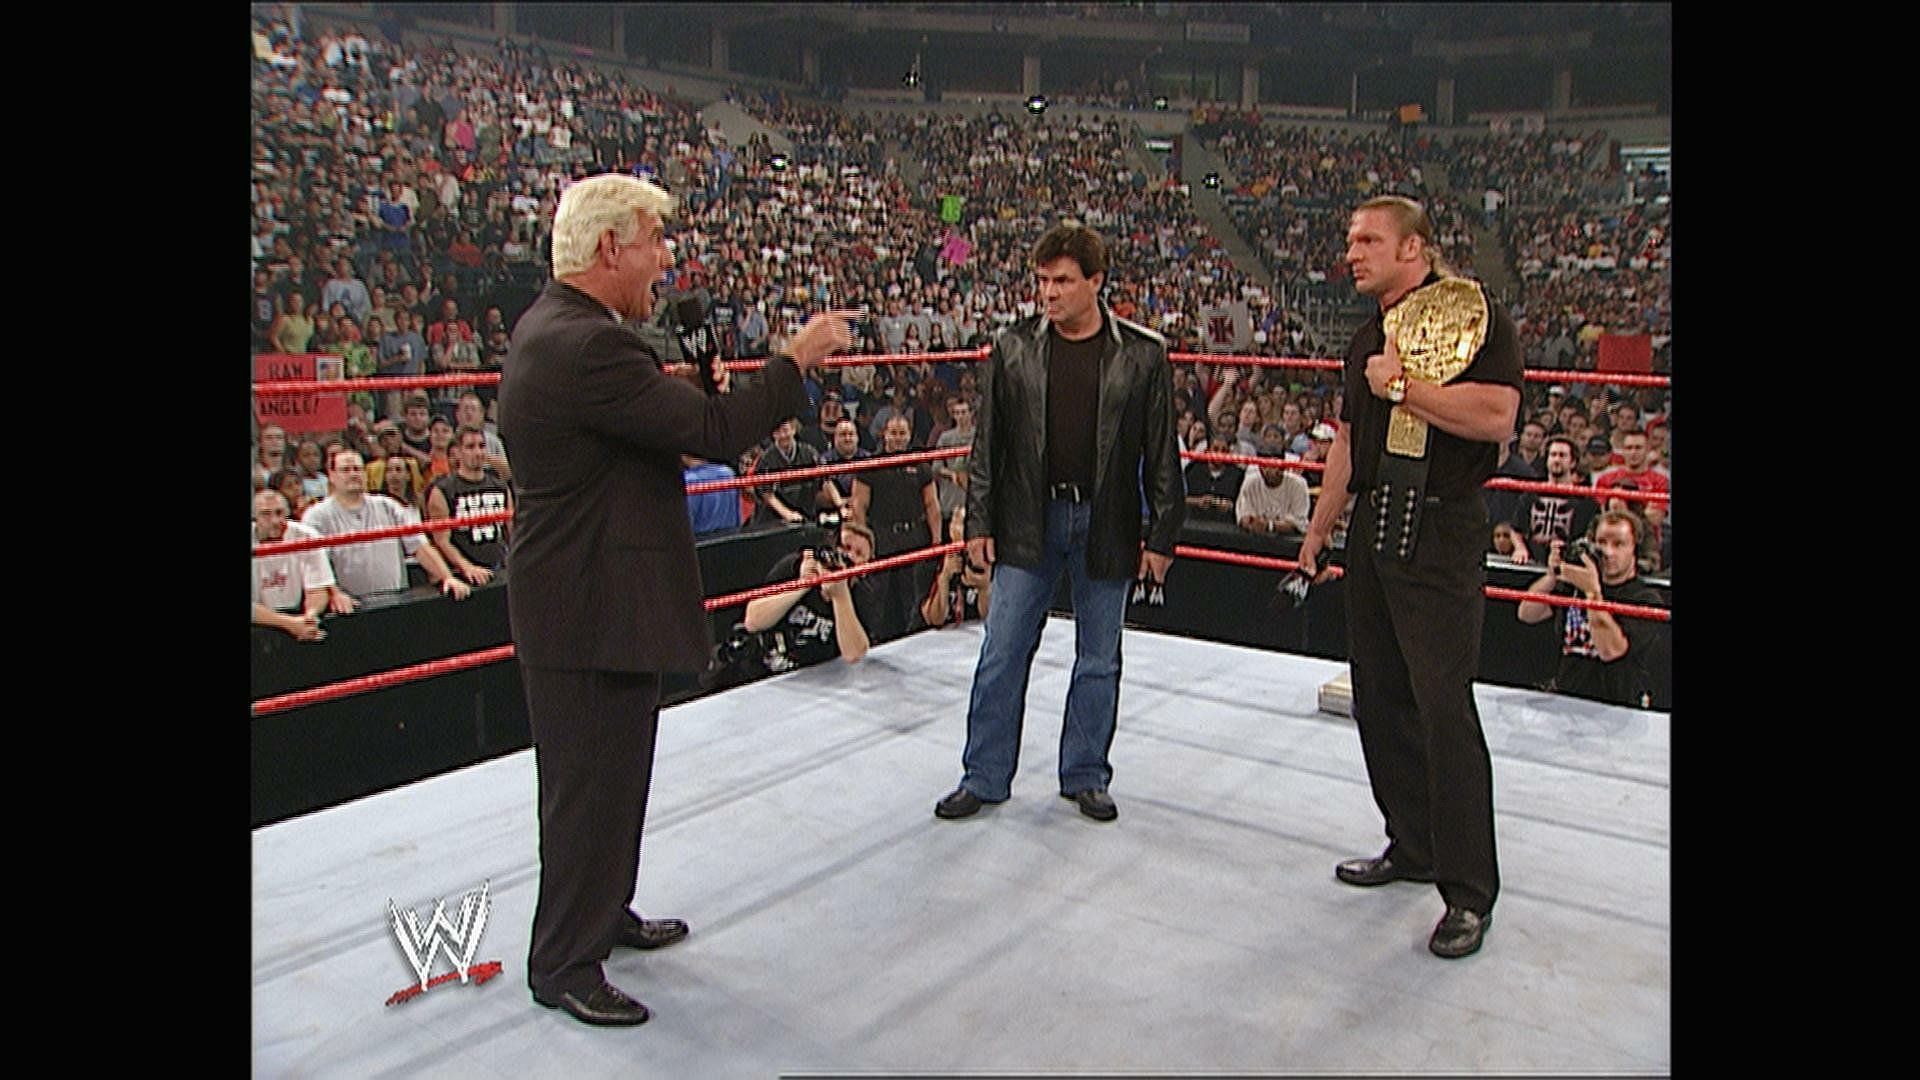 Ric Flair, Eric Bischoff, and Triple H